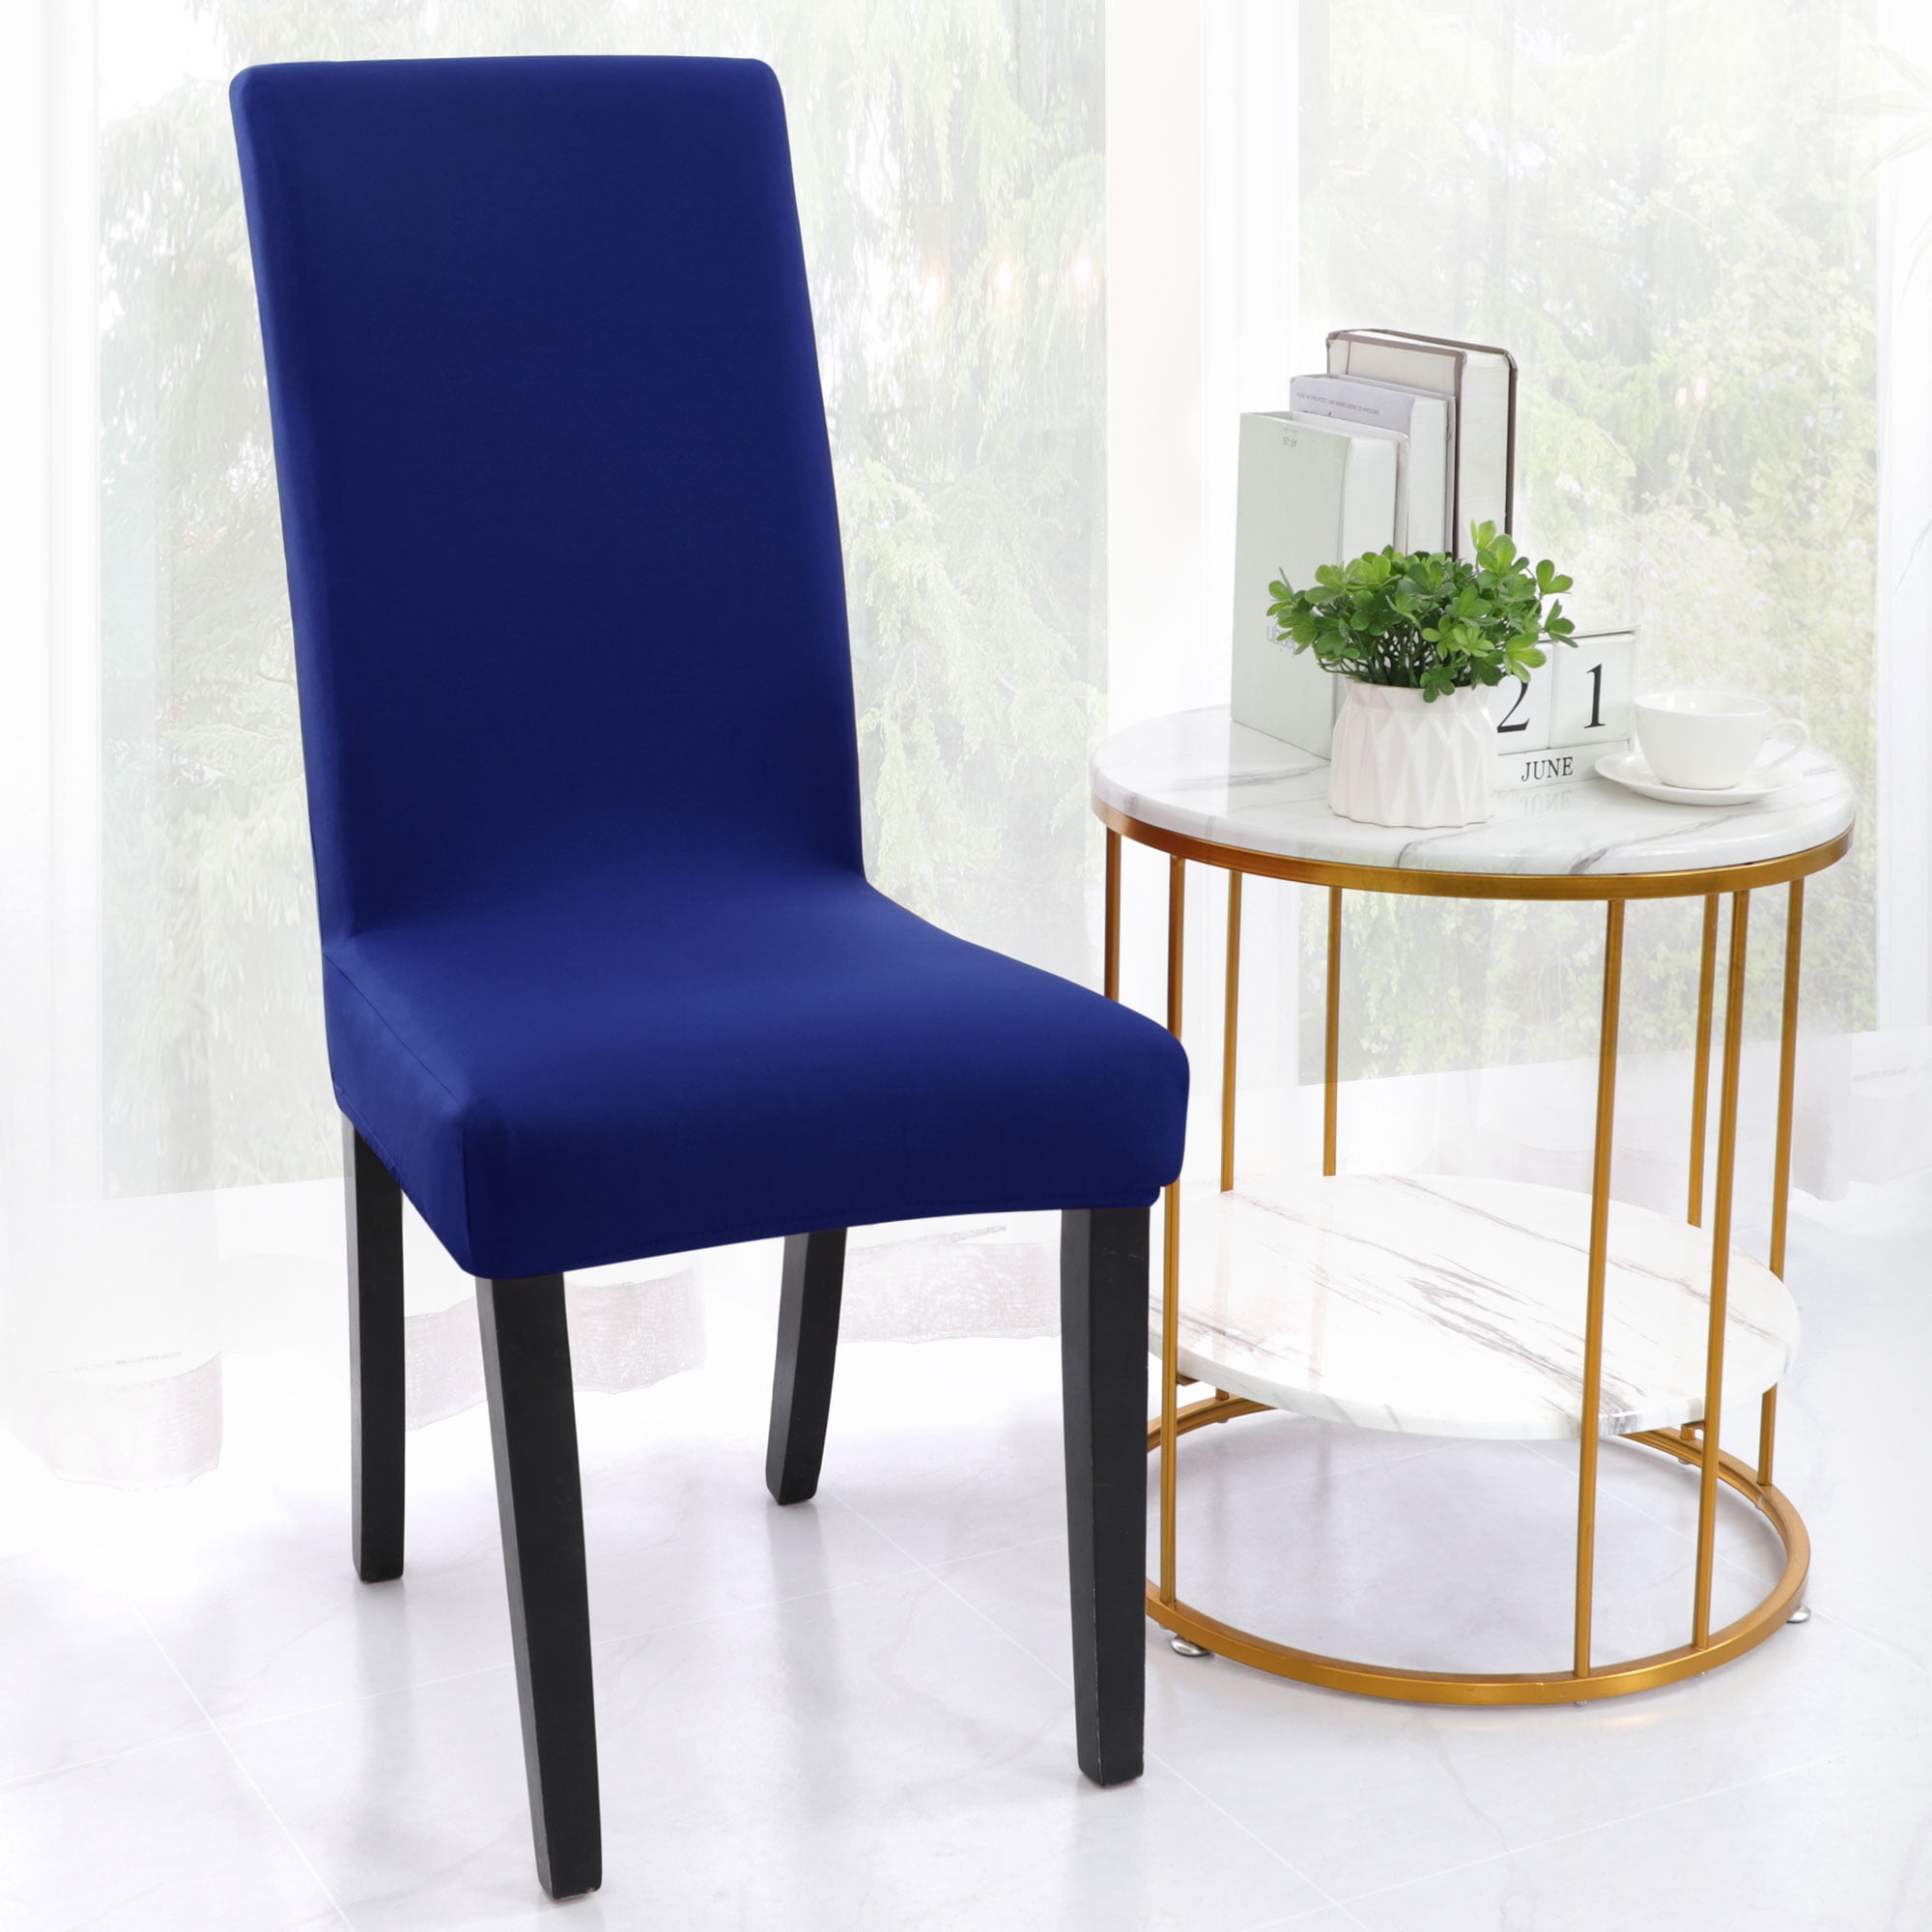 Details about   High Back Dining Chair Covers Stretch Removable Slipcovers Home Decor 